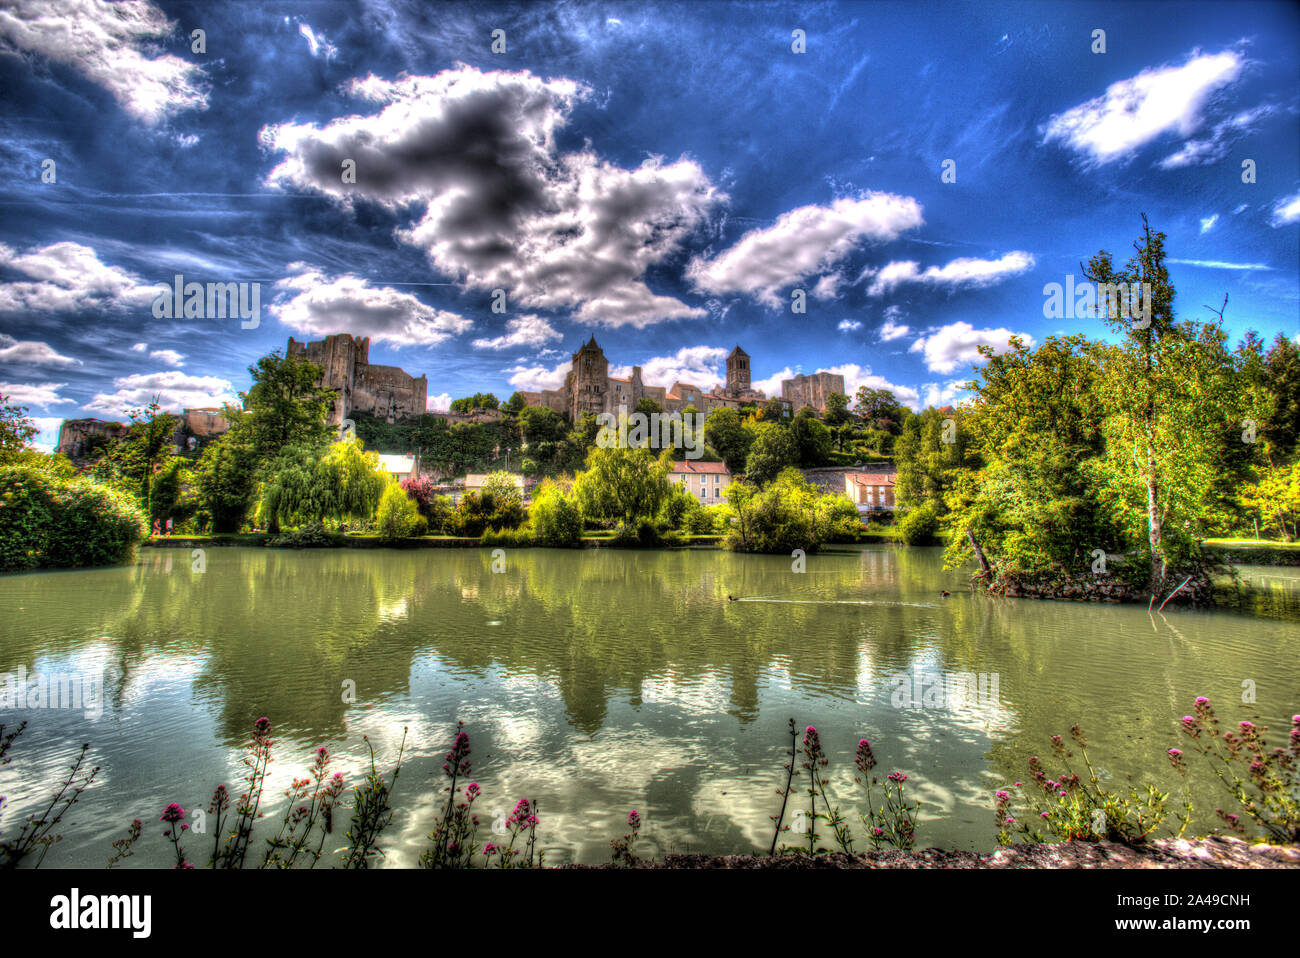 Chauvigny, France. A lake in a public garden with the Baronial Castle ruins, Donjon de Gouzon and Chateau d’Harcourt in the background. Stock Photo